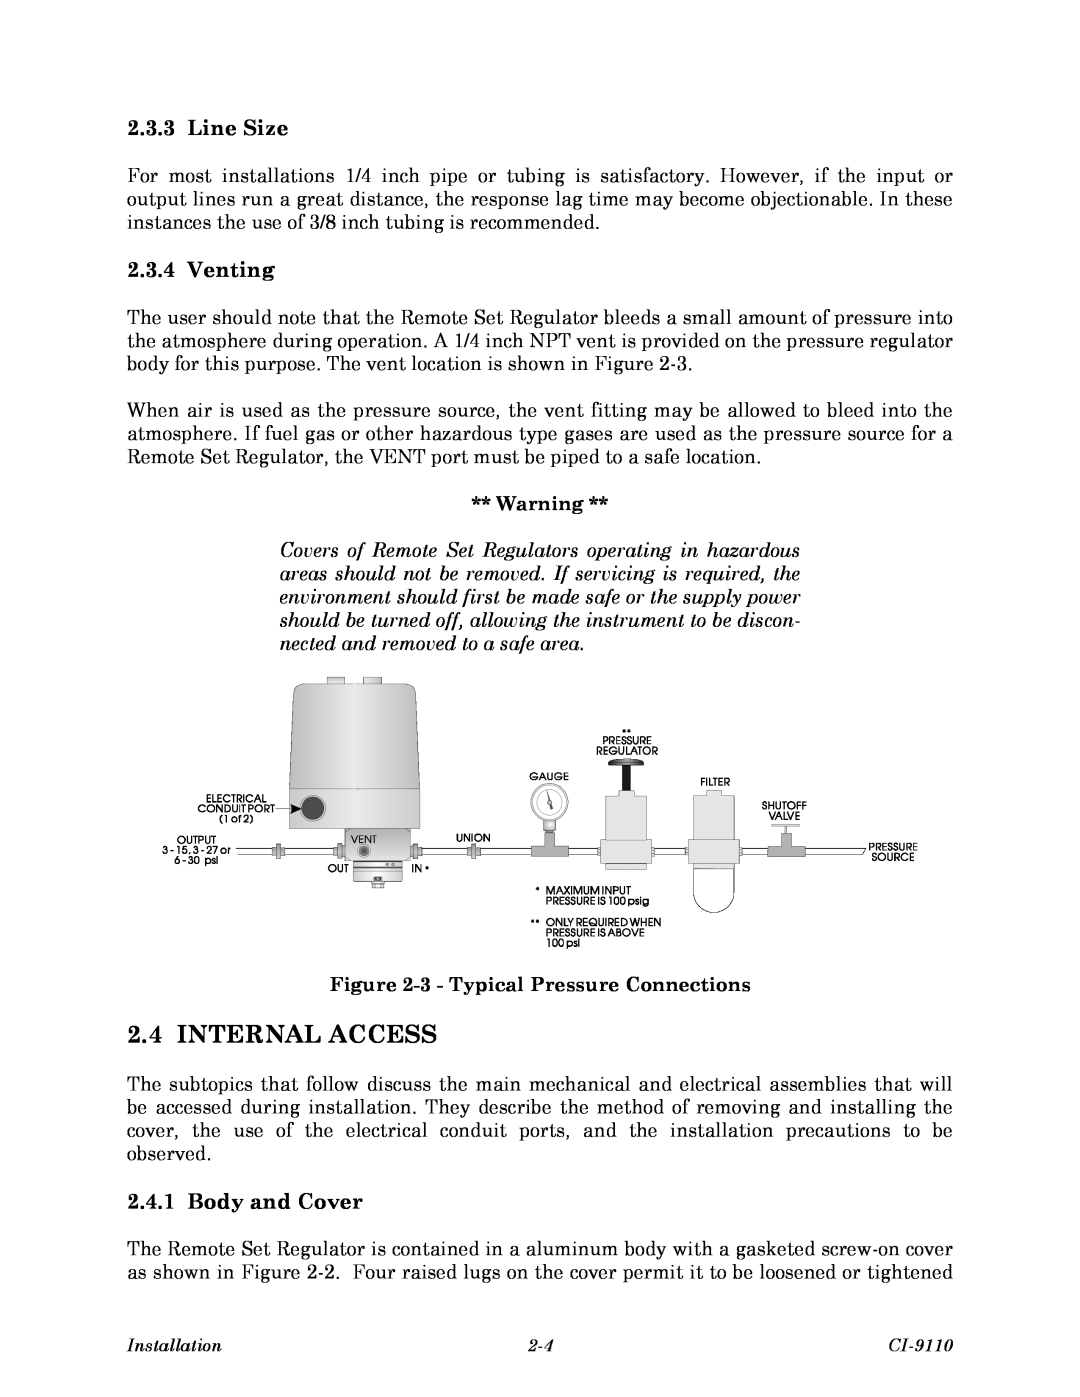 Emerson Process Management CI-9110 Internal Access, Line Size, Venting, Body and Cover, 3 - Typical Pressure Connections 